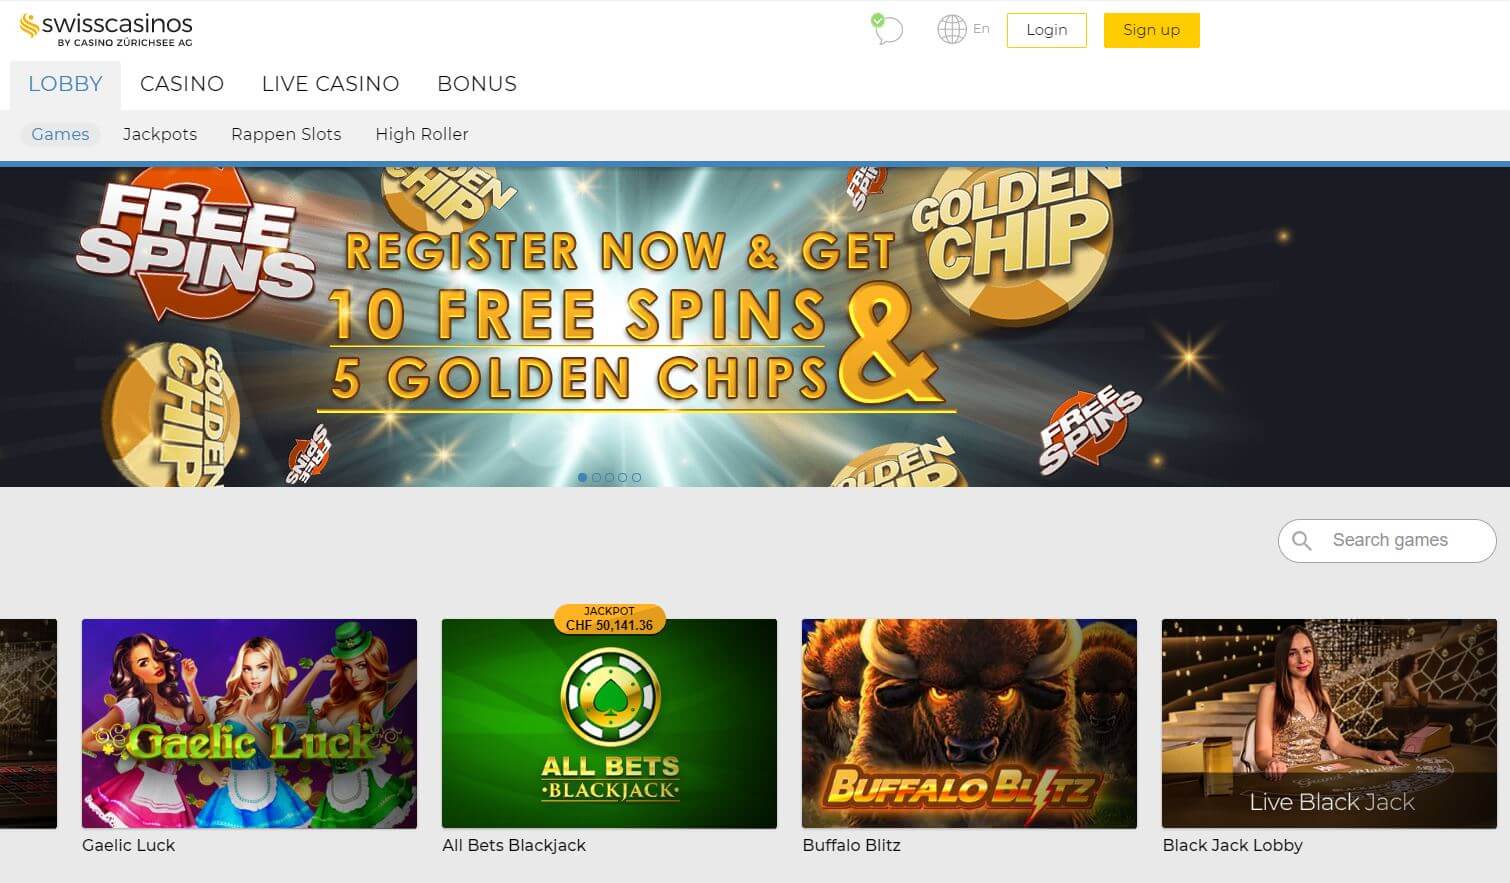 Swisscasinos Promo Code: Get 100% up to CHF 250 + 50 Free Spins + 20 Golden Chips